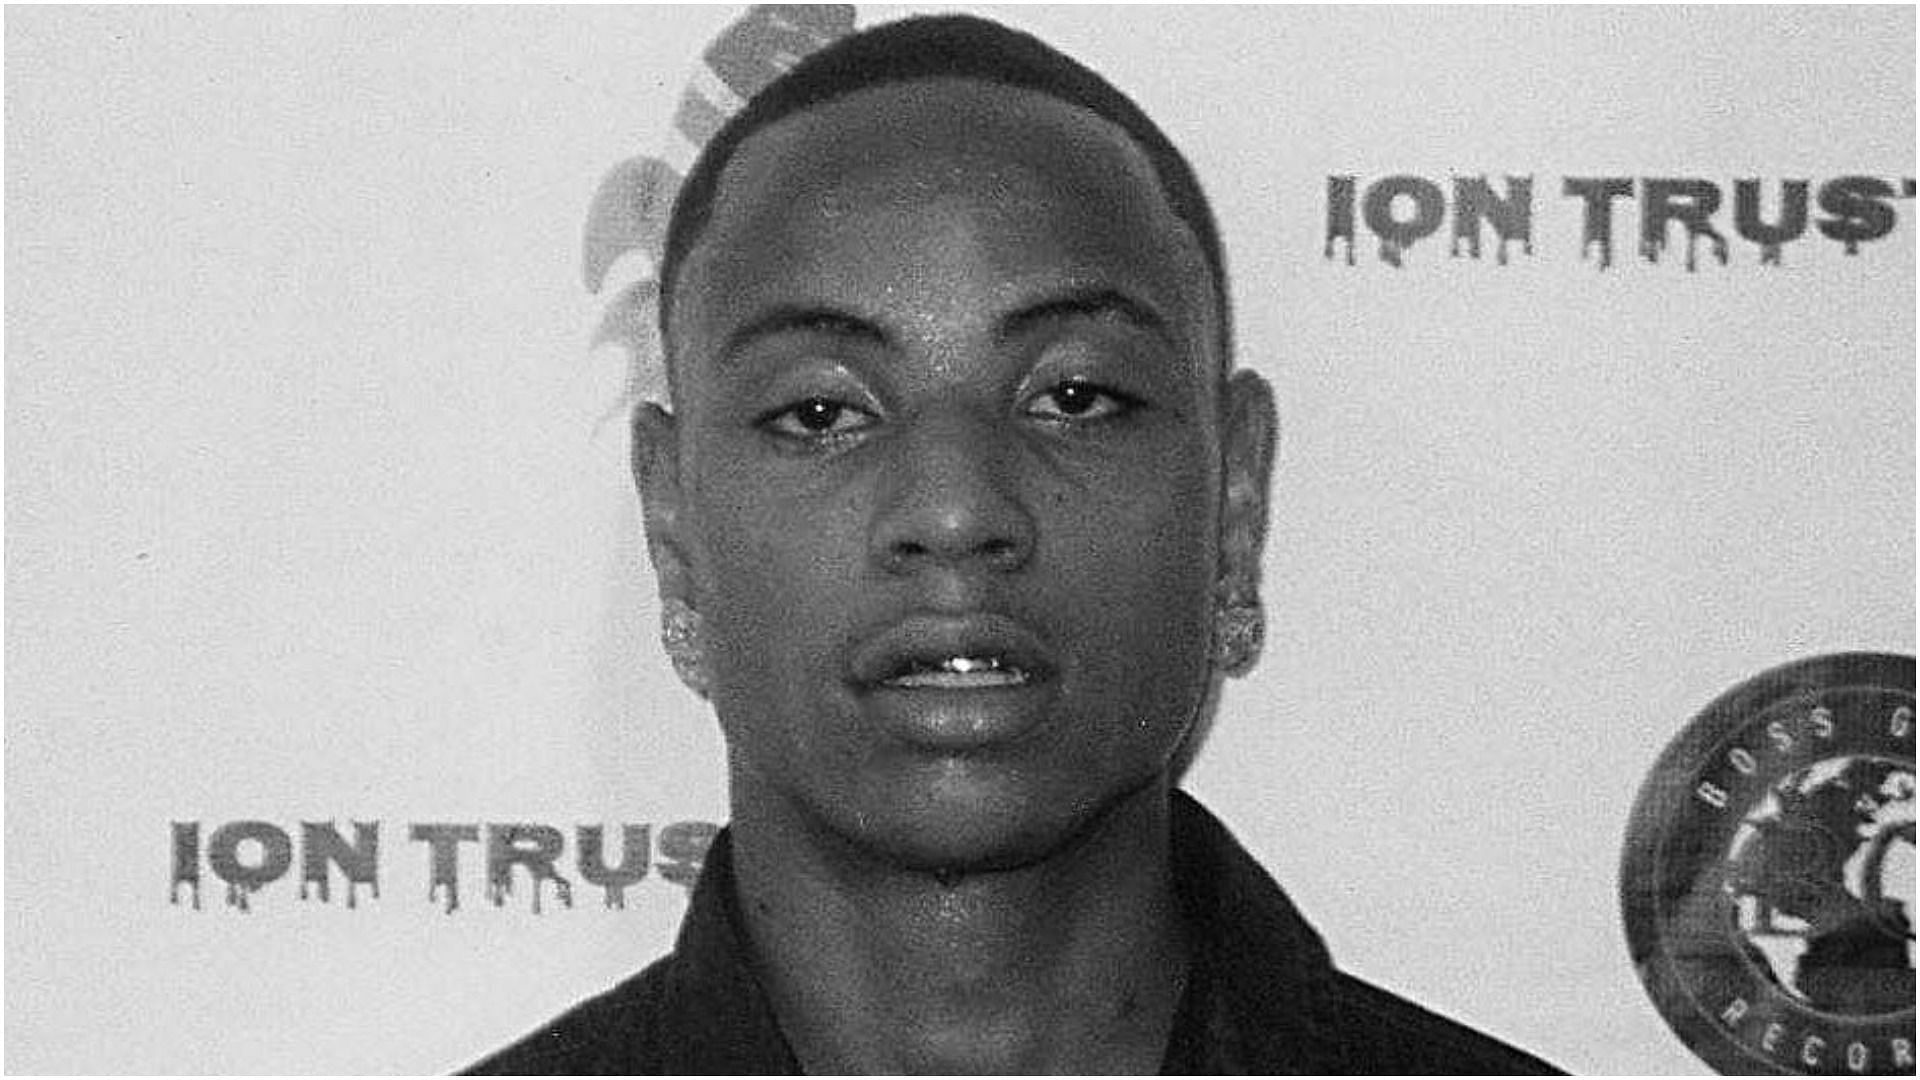 The hip-hop star recently died at the age of 26 (Image via trill6600/Twitter)